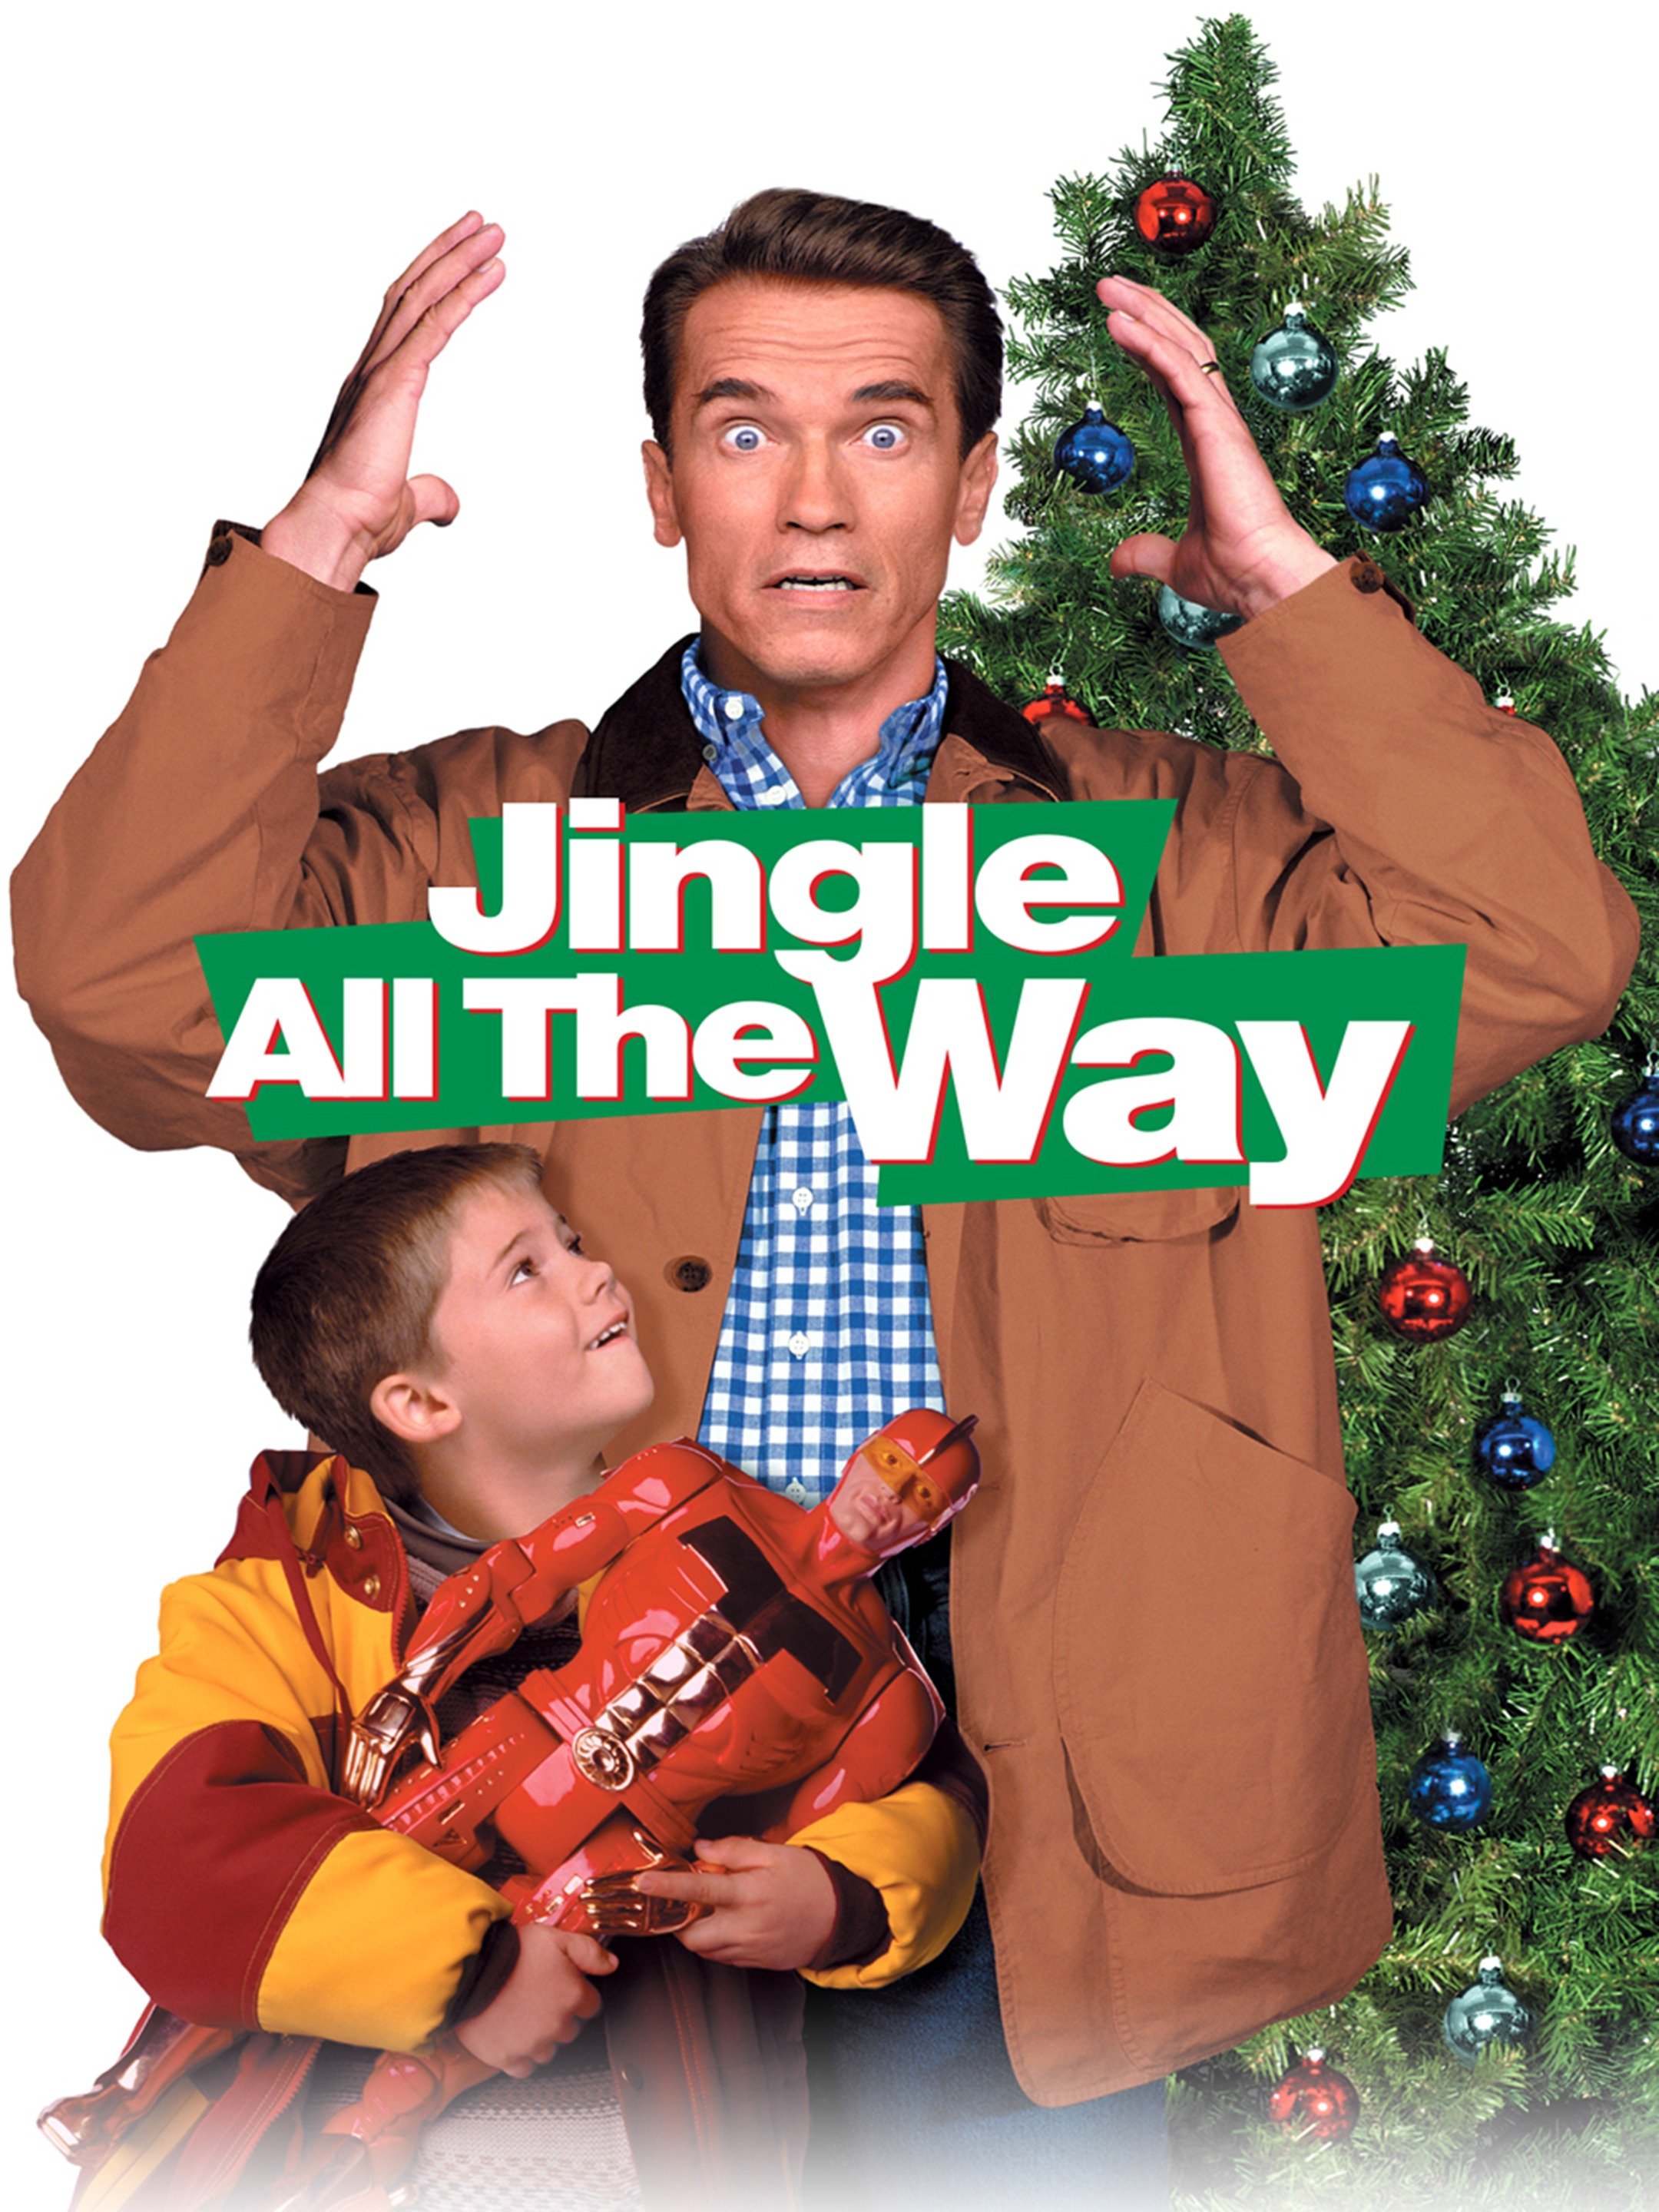 Jingle All the Way Trailer 1 Trailers & Videos Rotten Tomatoes